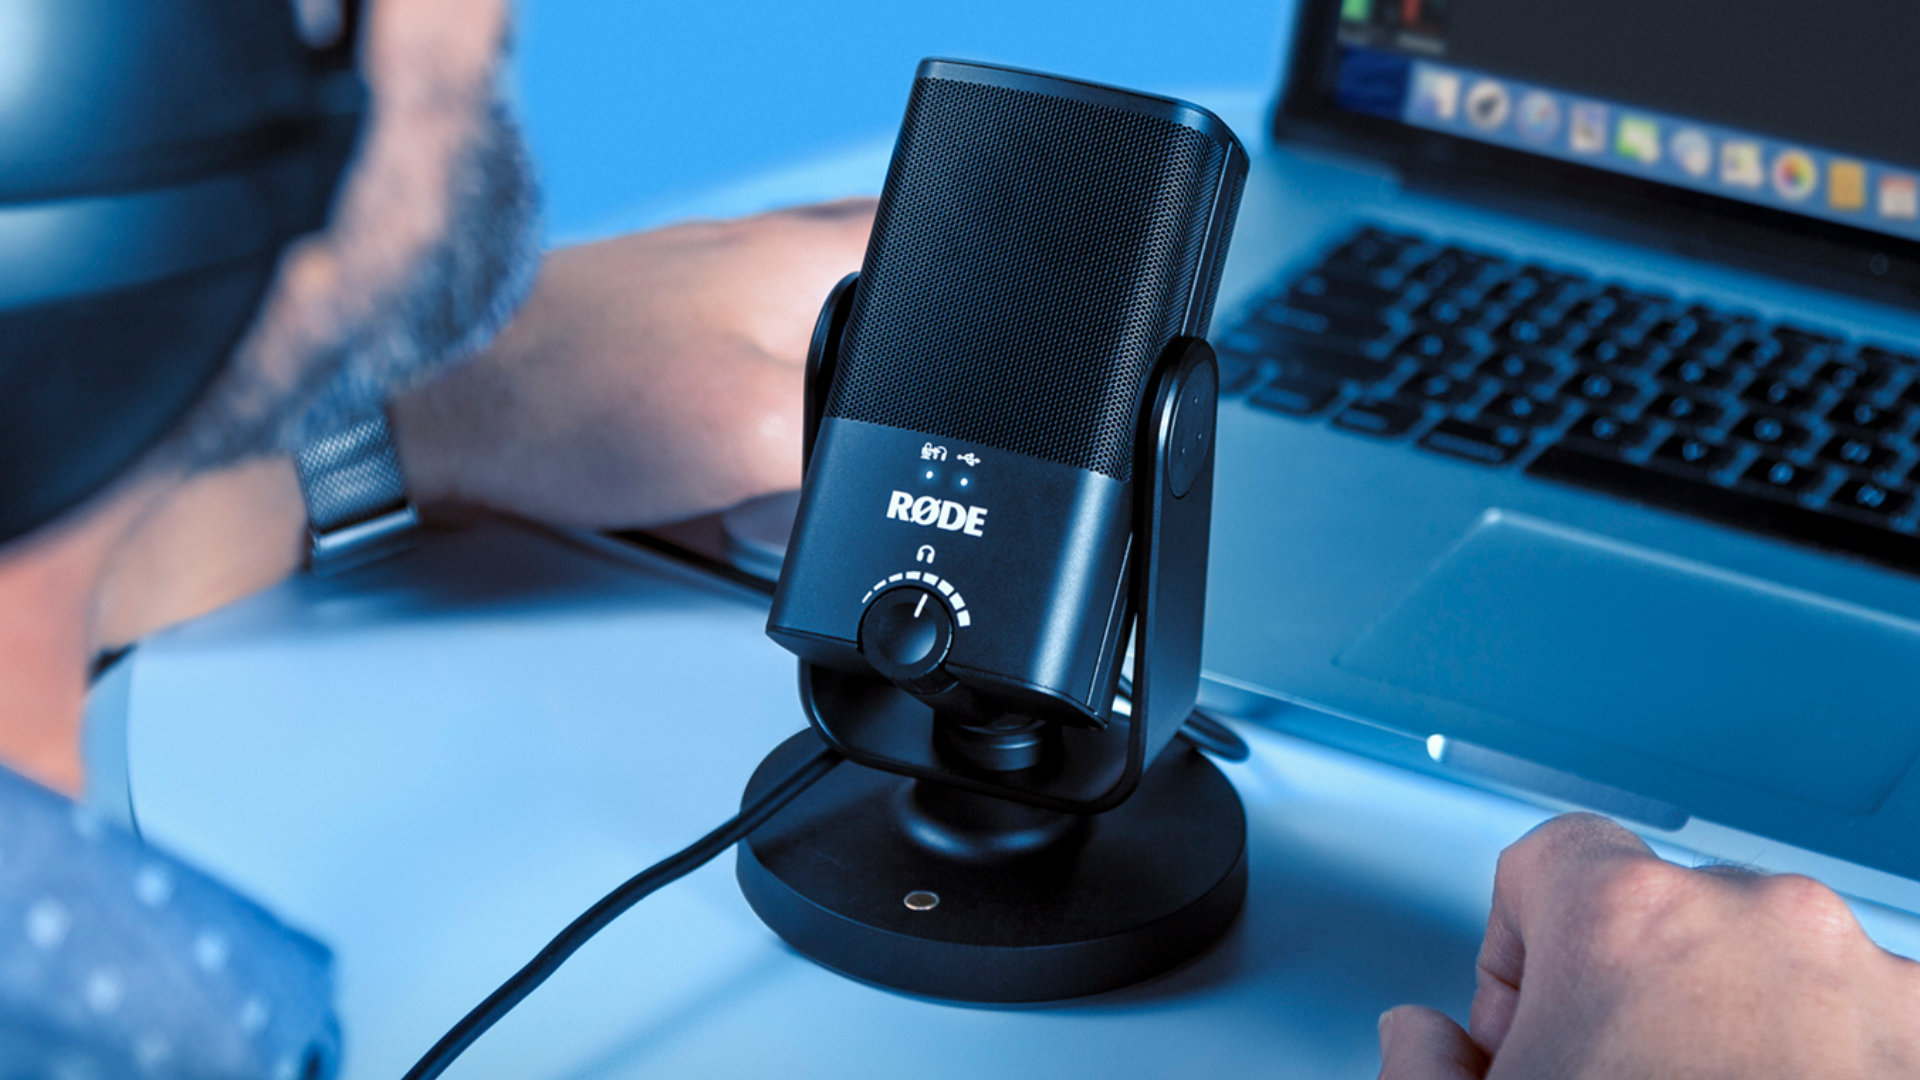 Best gaming microphone: the Rode NT-USB Mini, pictured on a desk in use by a human being.